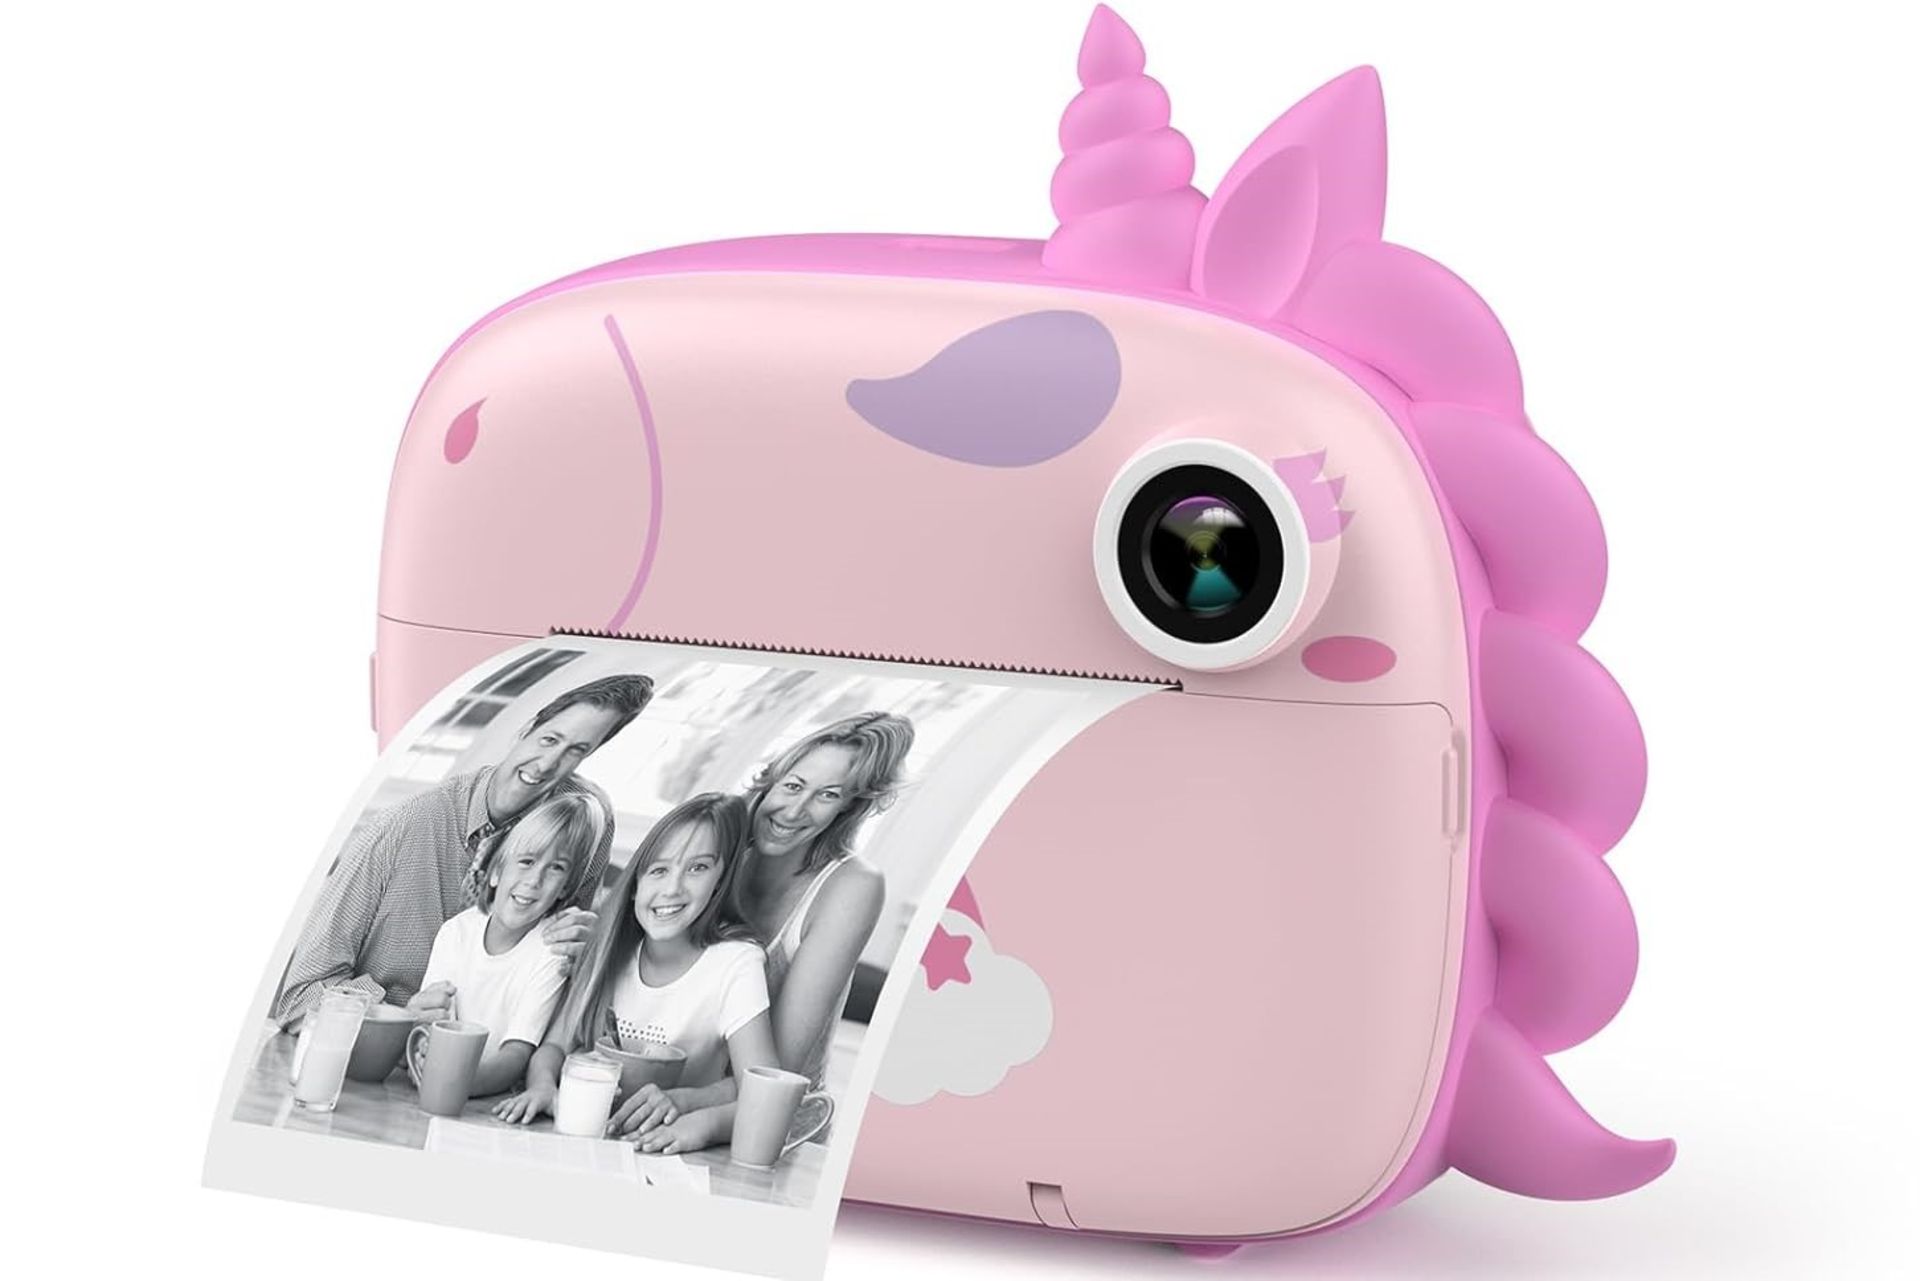 RRP £400 Lot of 10 x HiMont Kids Camera Instant Print, Digital Camera for Kids with No Ink Print - Image 2 of 3